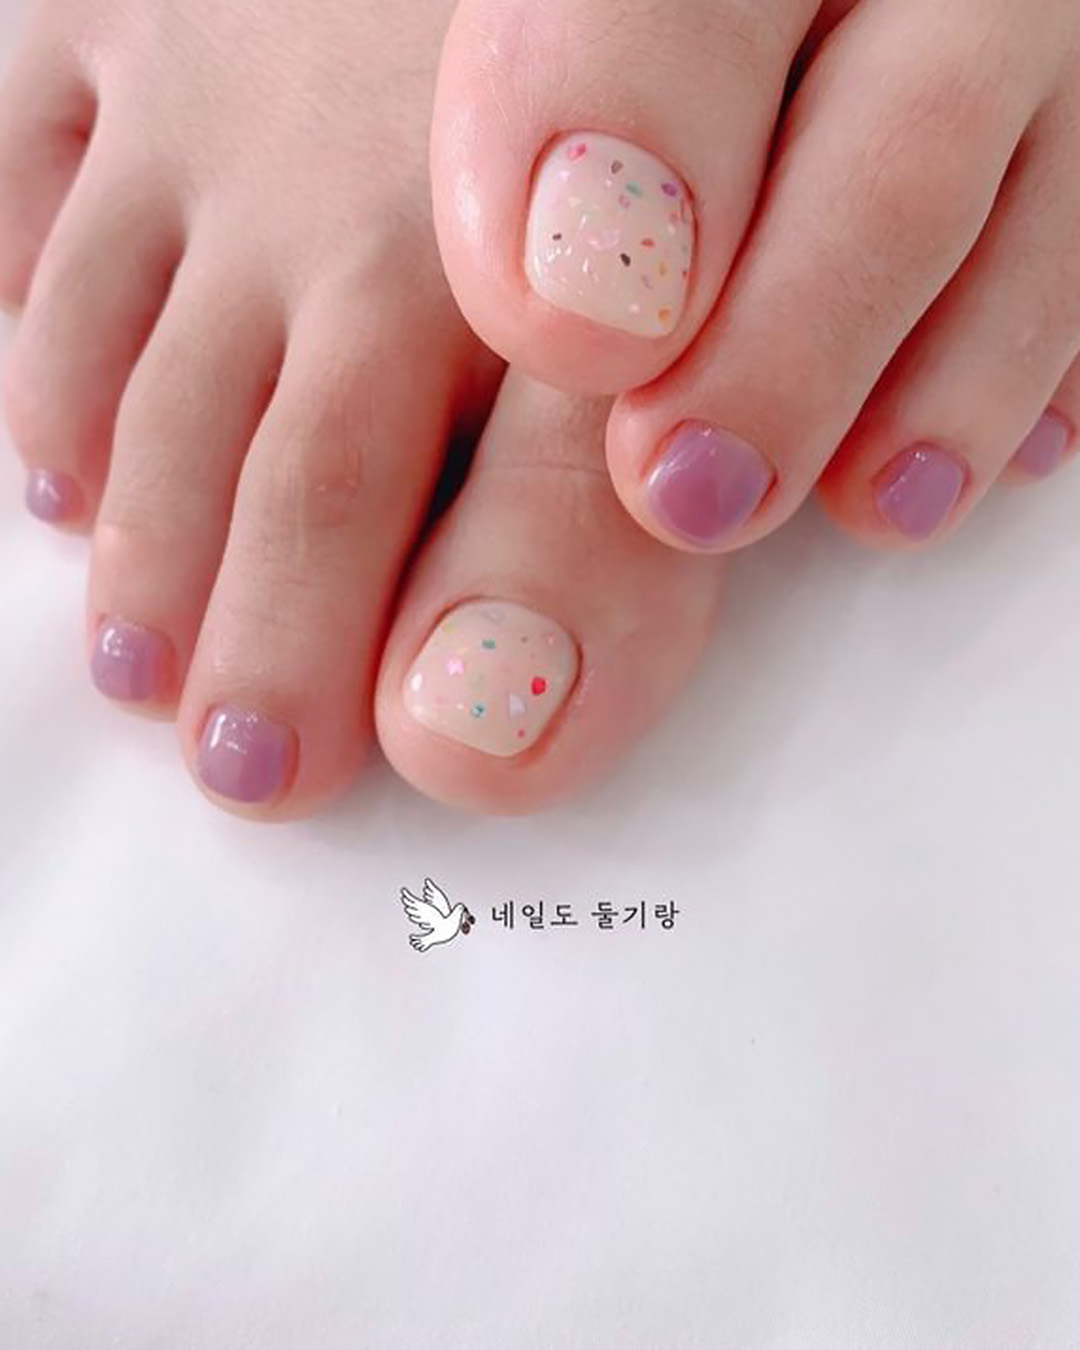 pink and white nails toe cute design for wedding doolginail